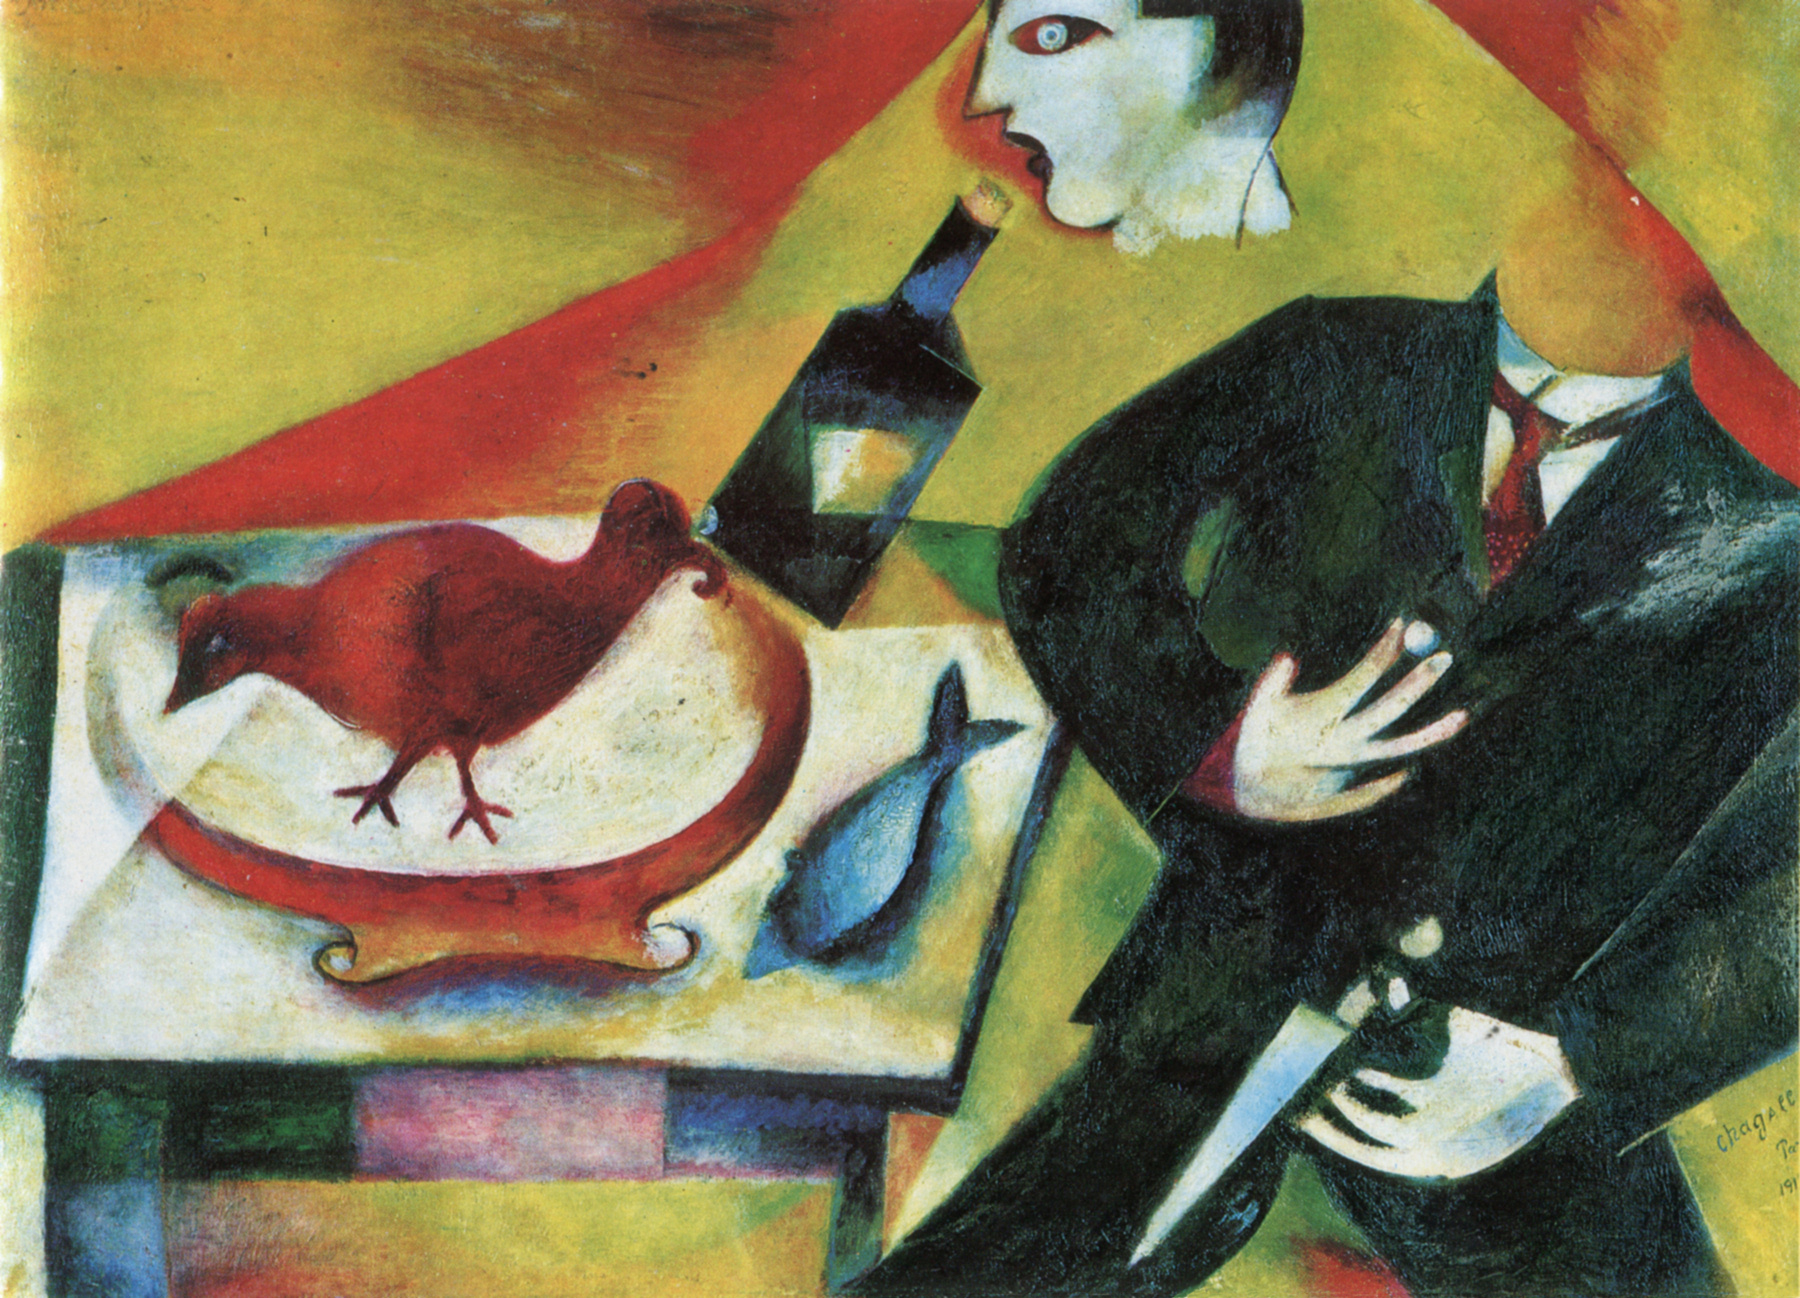 The Drunkard  by Marc Chagall - 1911-12 - 85 x 115 cm private collection